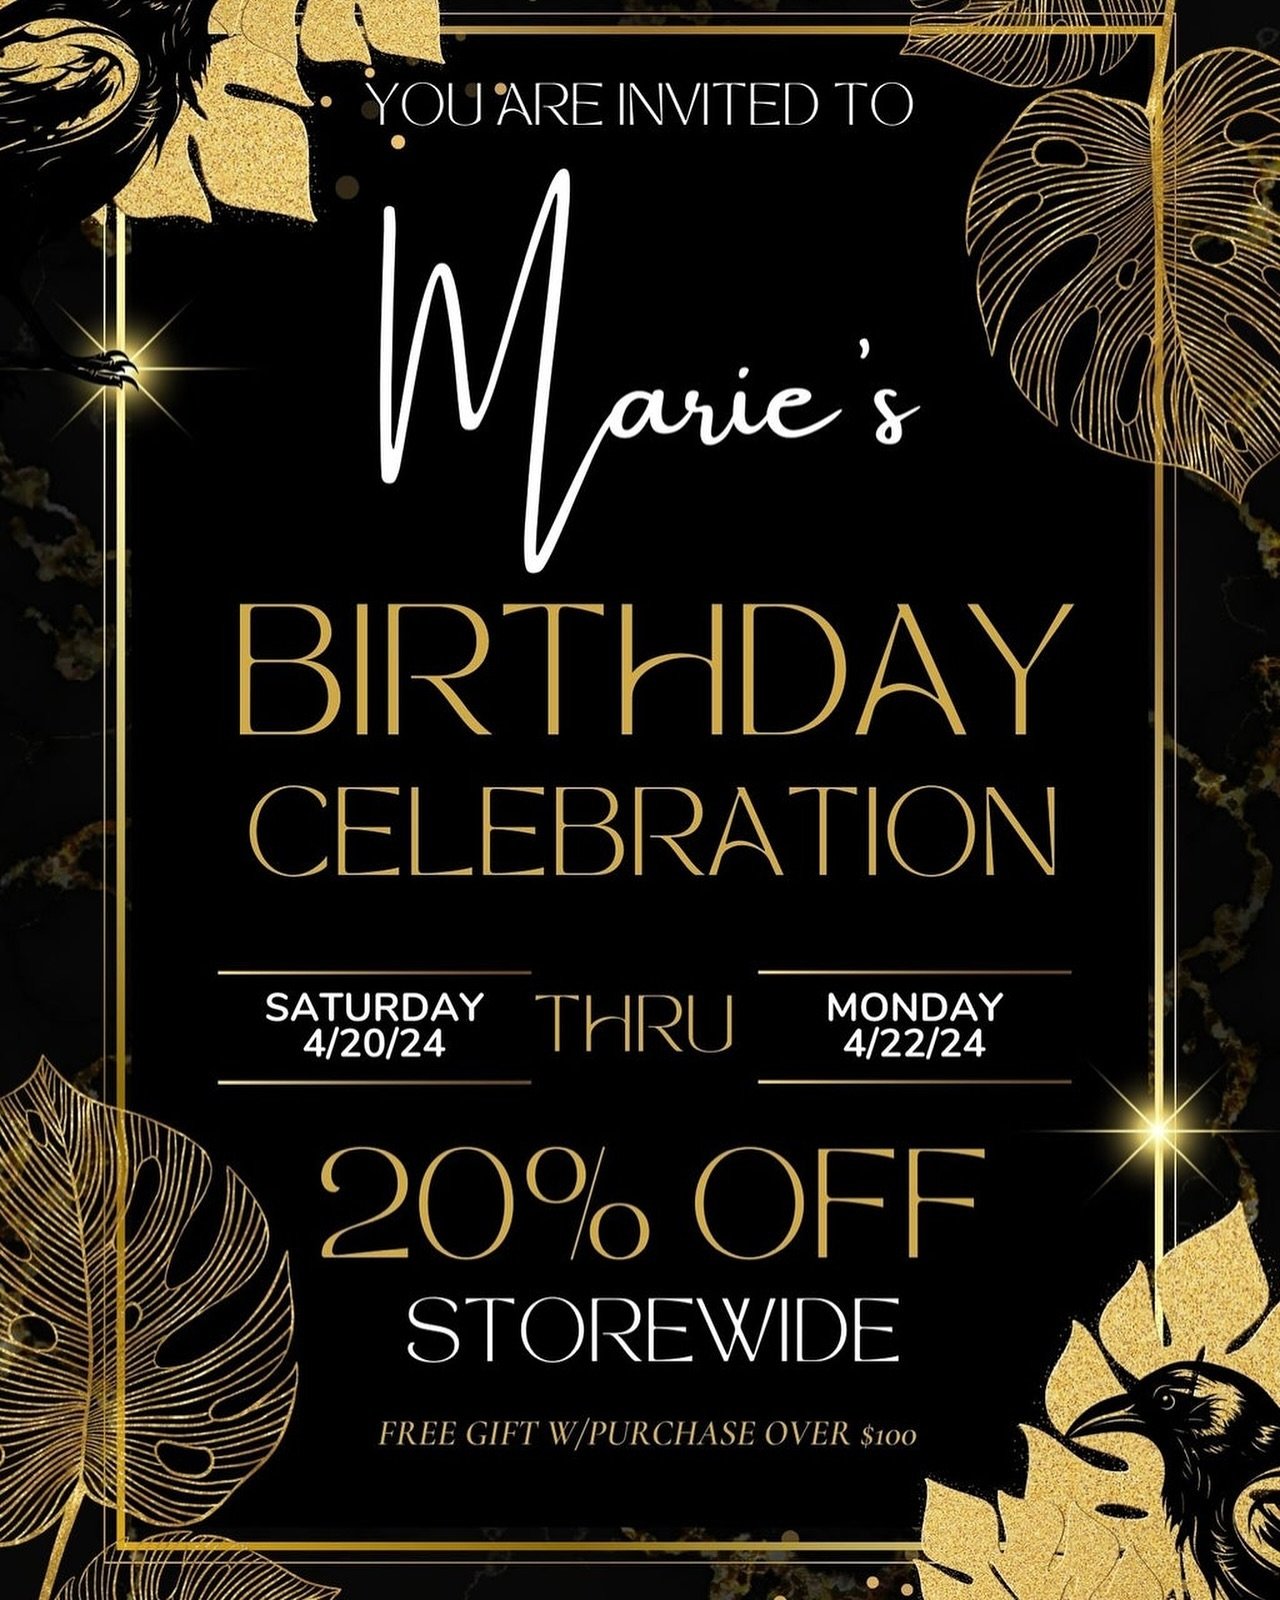 A Message to Magick Seekers from Feathered Outlaw:

This weekend is Marie Ortega&rsquo;s Birthday 🎂so celebrate with a Storewide Sale this weekend✨ 

Everything in the shop will be 20% off 🥳

Get some fun gifts with purchases for shoppers and bevie